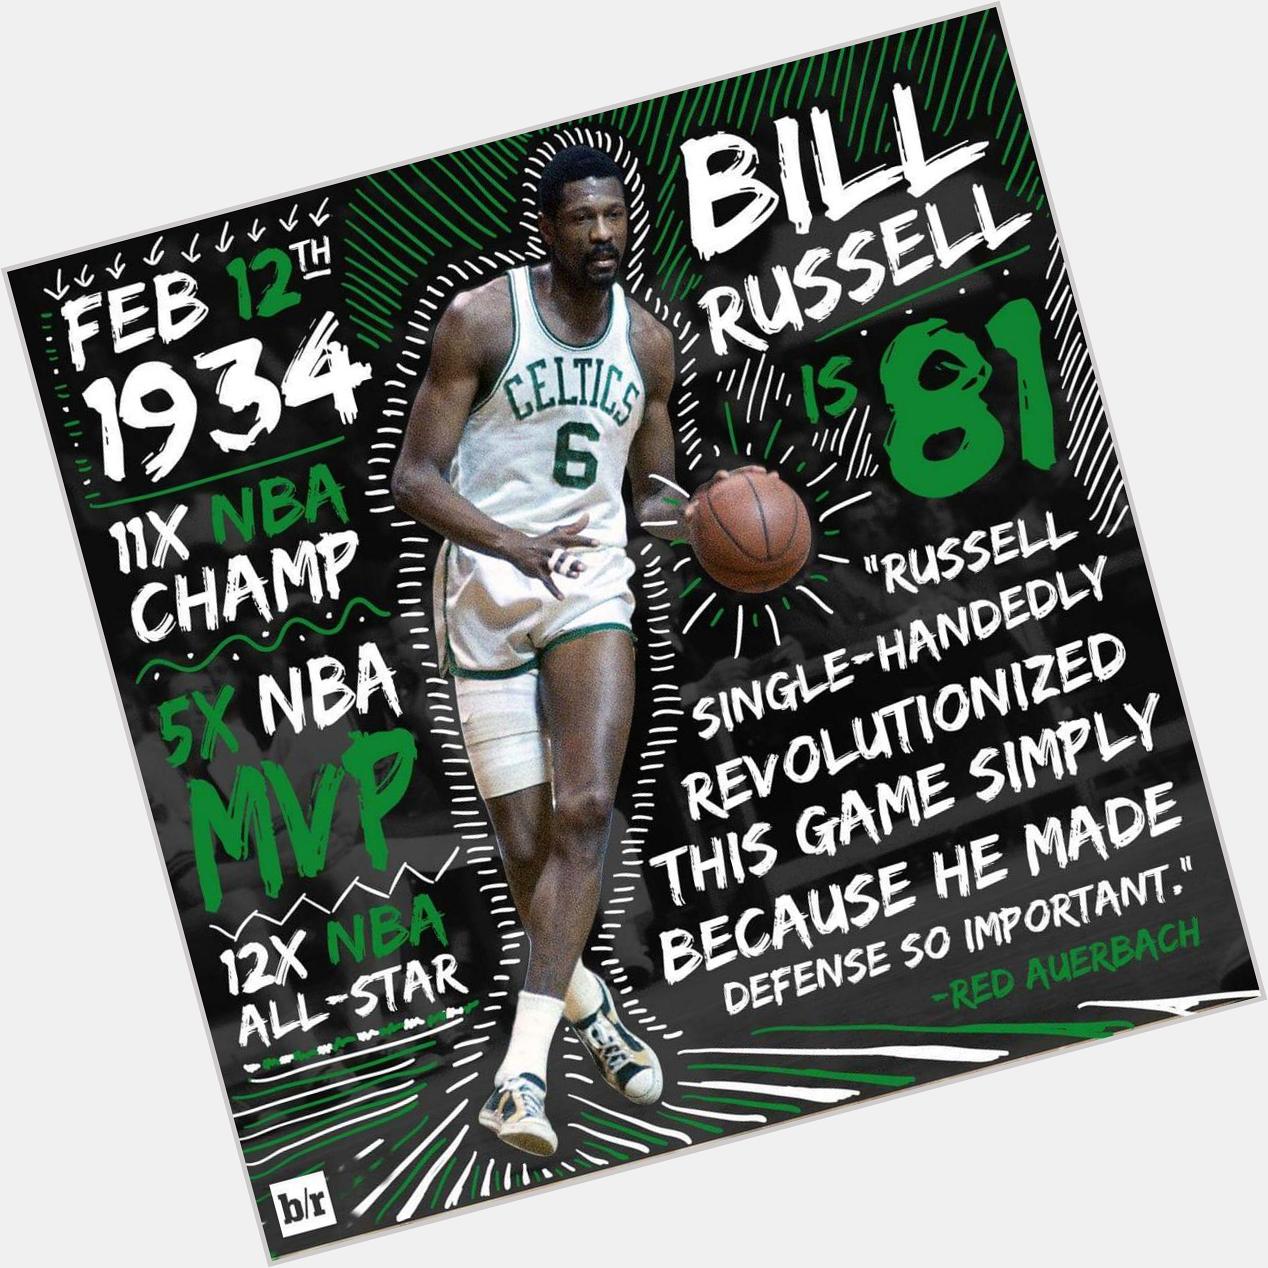   # Happy Birthday Bill Russell the greatest ever 